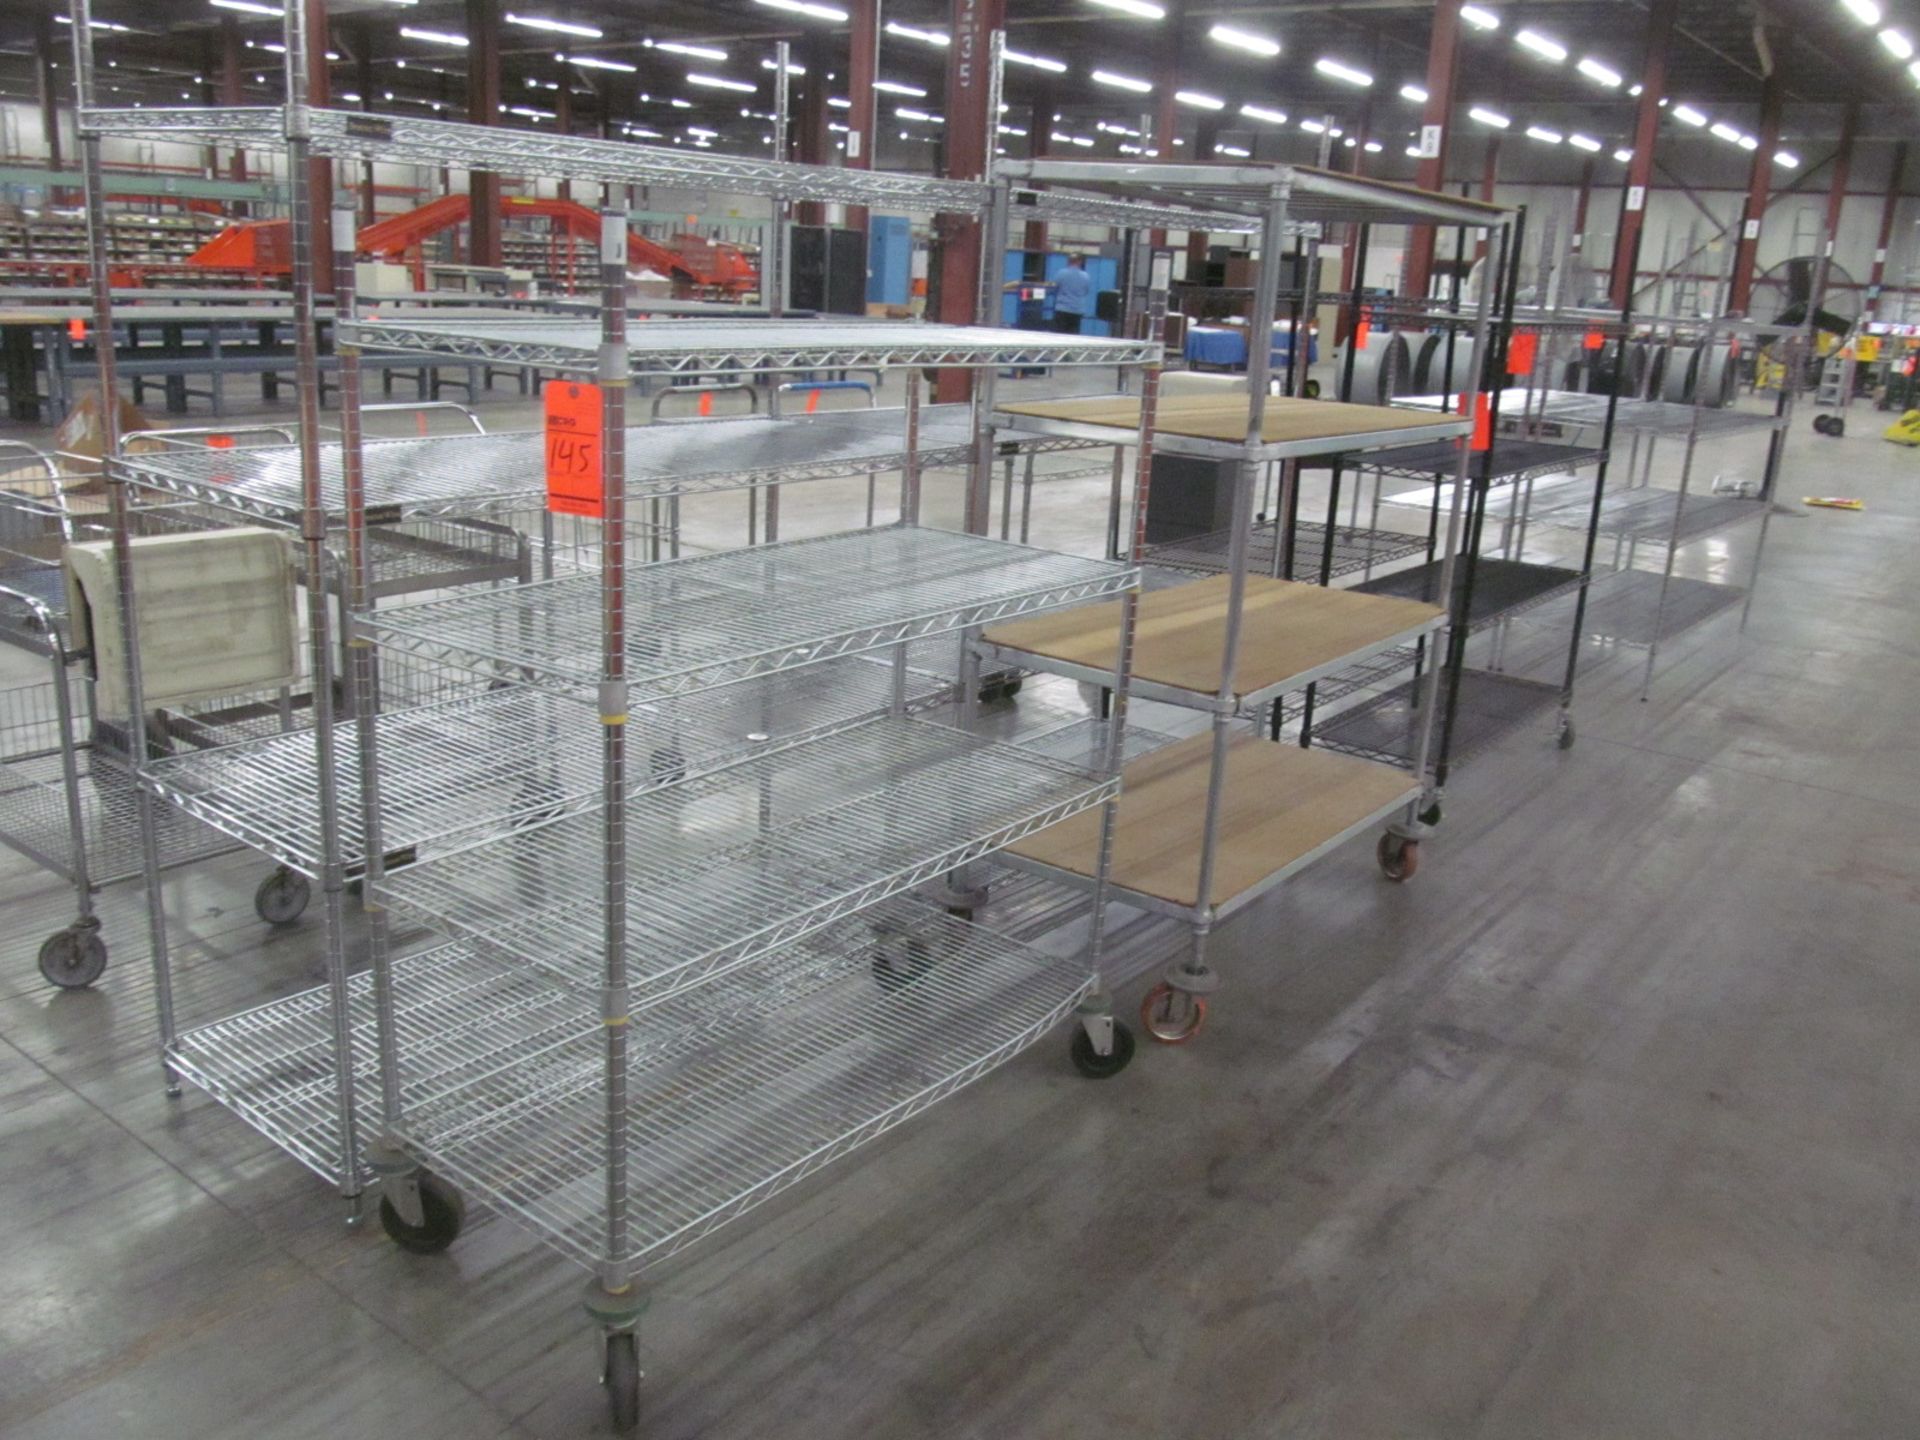 Lot of (4) assorted shelving units all 4' long-(3) units on casters